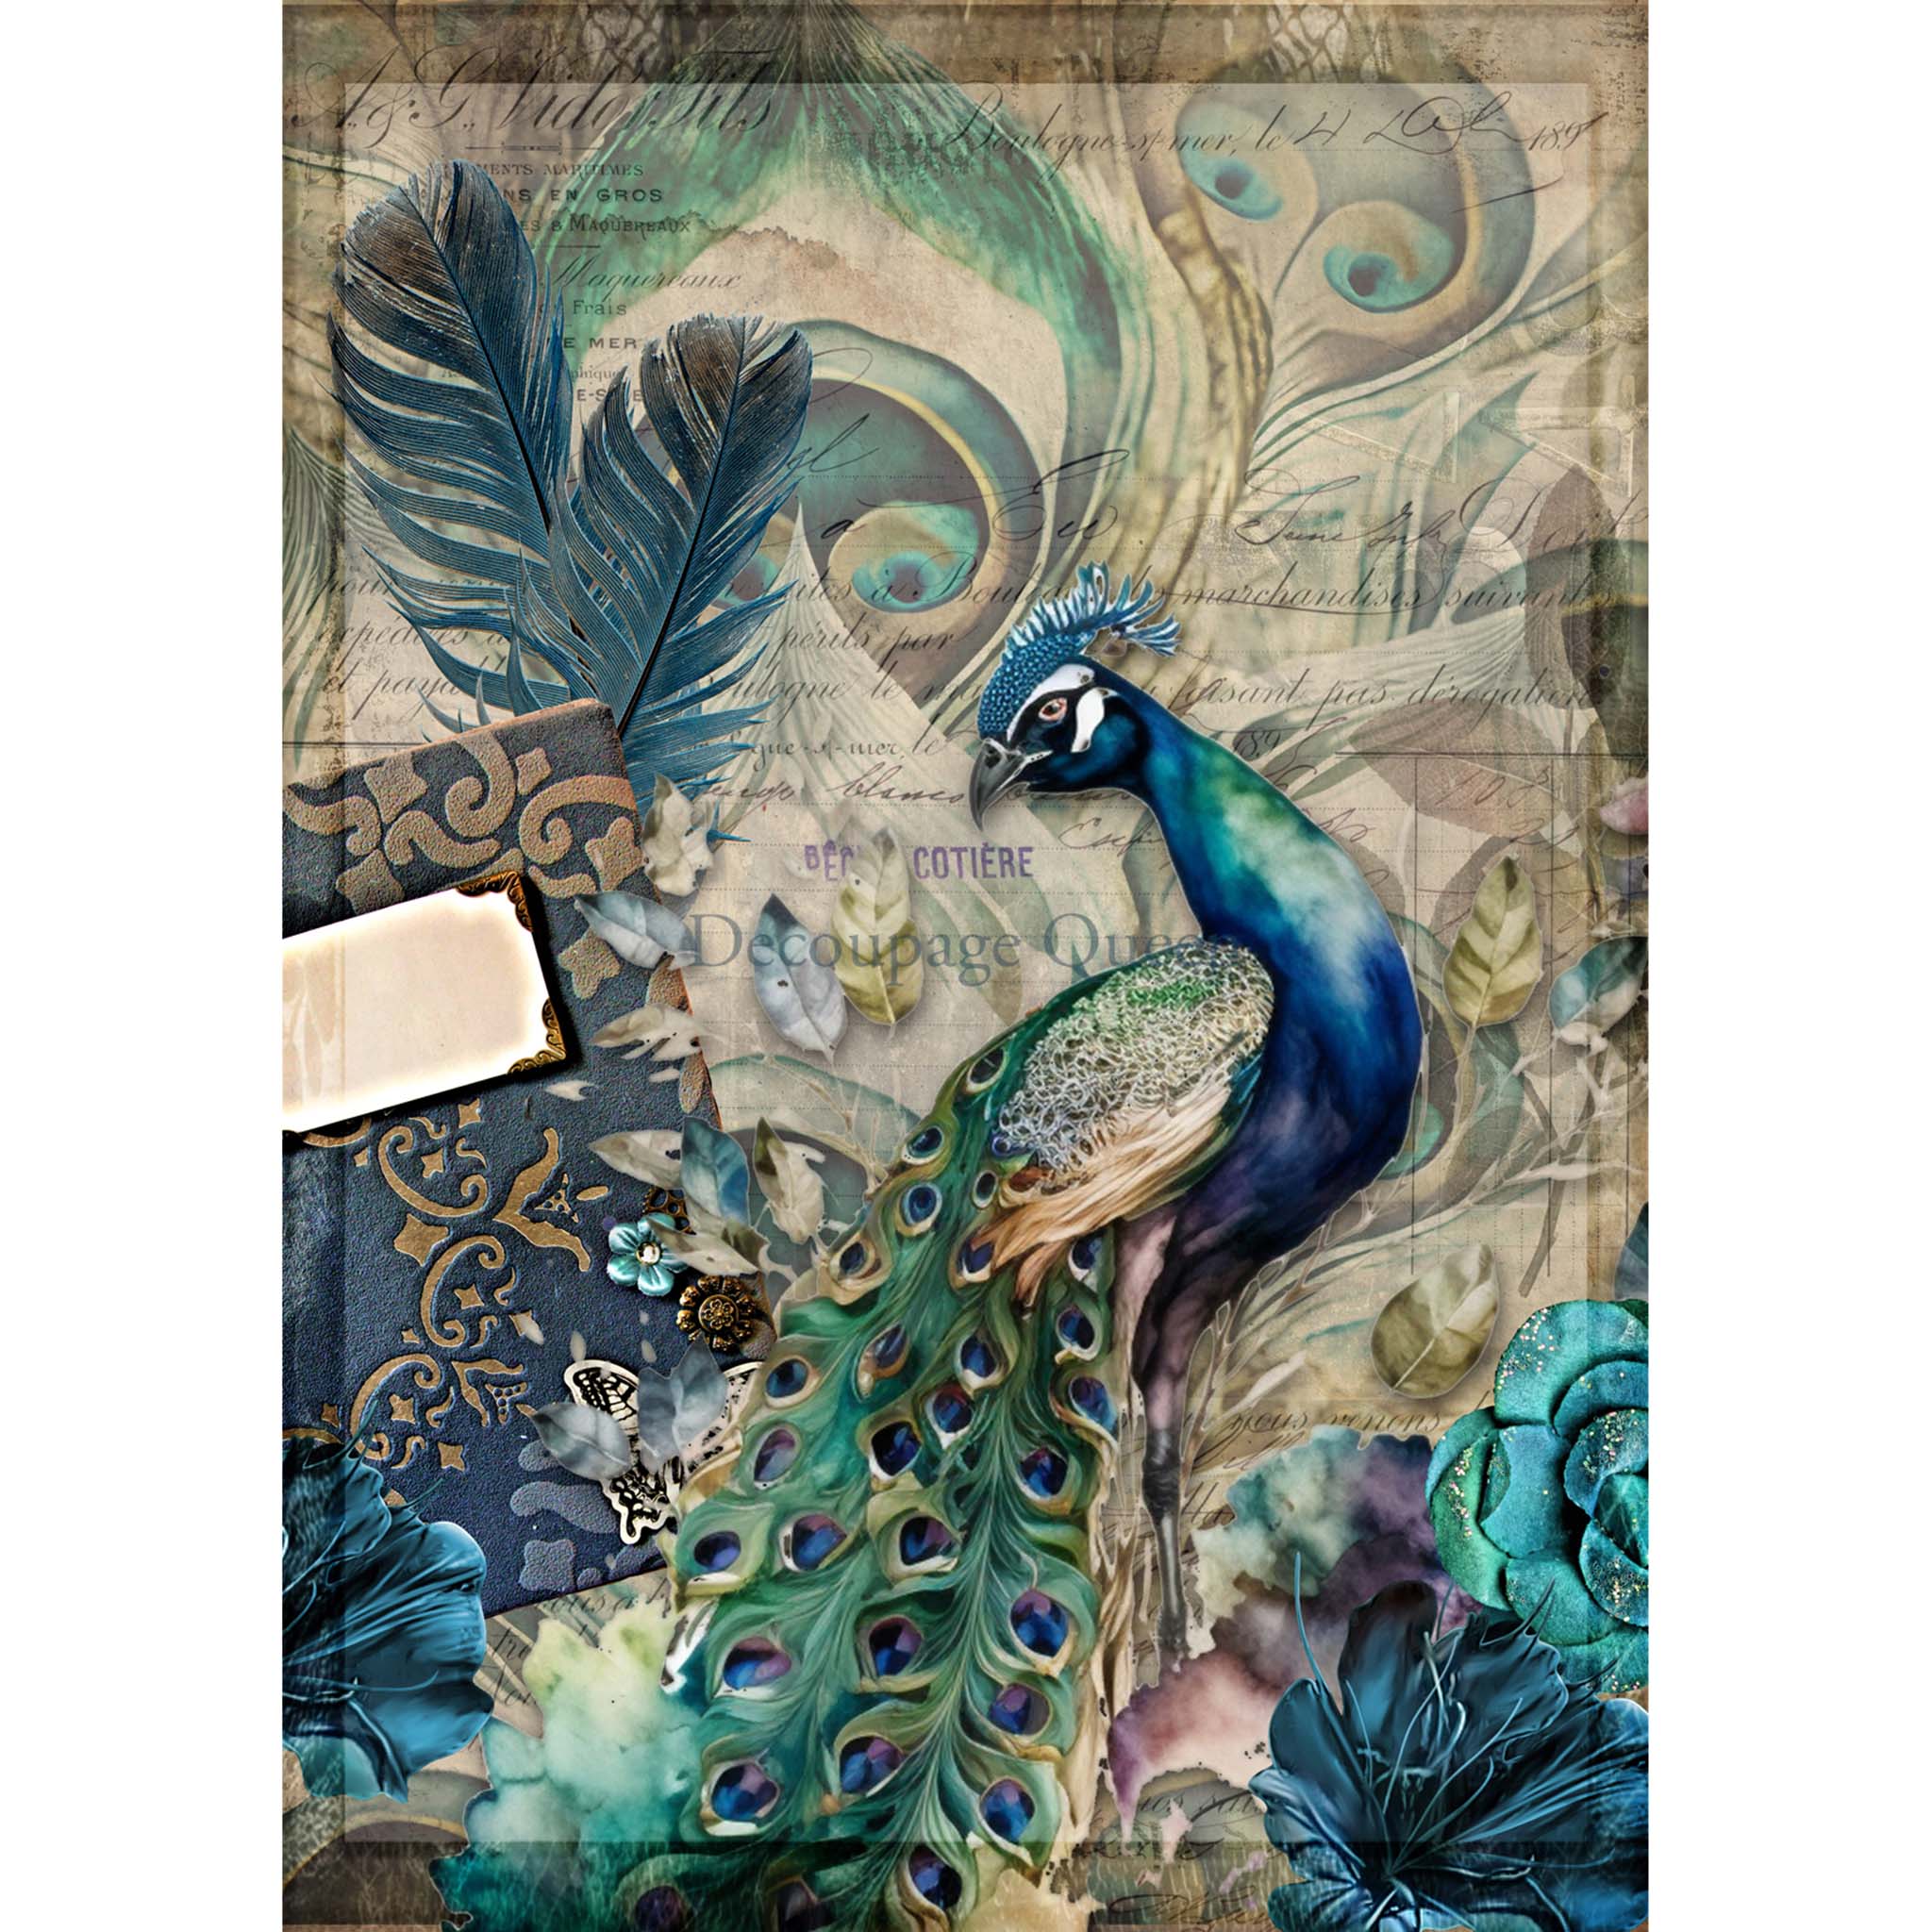 A0 rice paper design that features a vintage document adorned with a majestic peacock and delicate florals. White borders are on the sides.